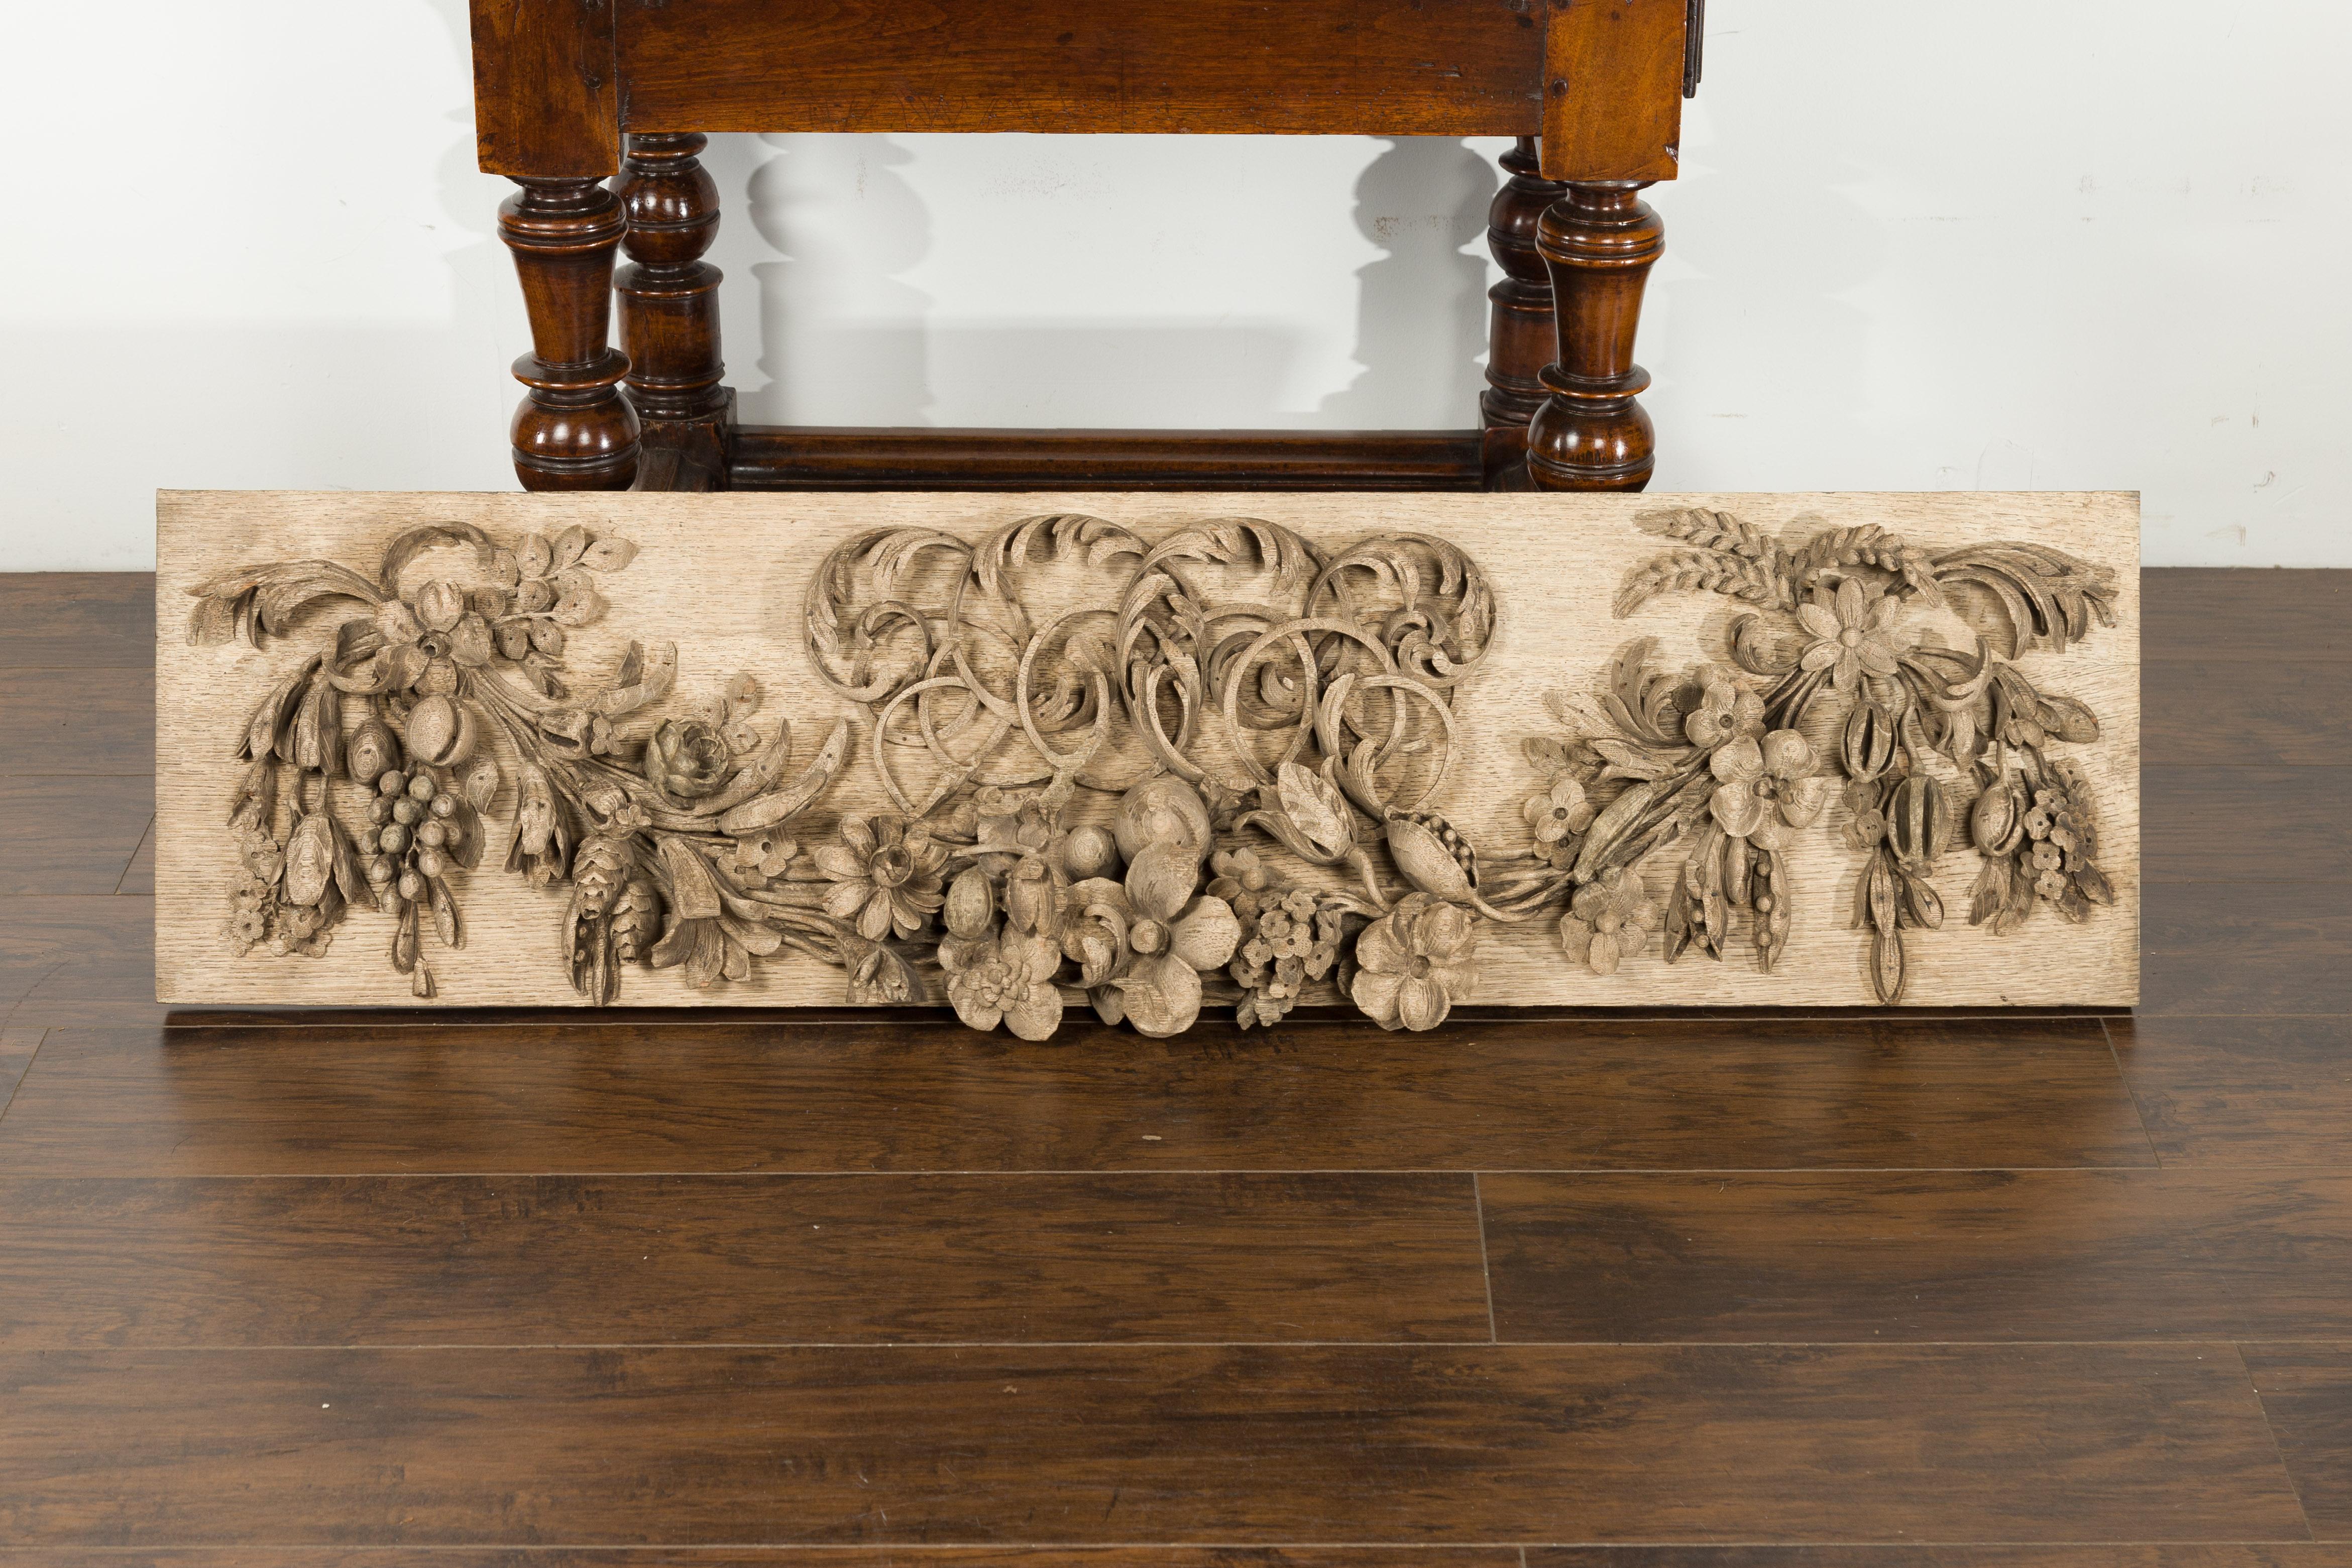 An English carved wooden fragment from the 19th century, with fruits and flowers garland. Created in England during the 19th century, this horizontal fragment captures our attention with its skillful carving and natural patina. The panel is adorned